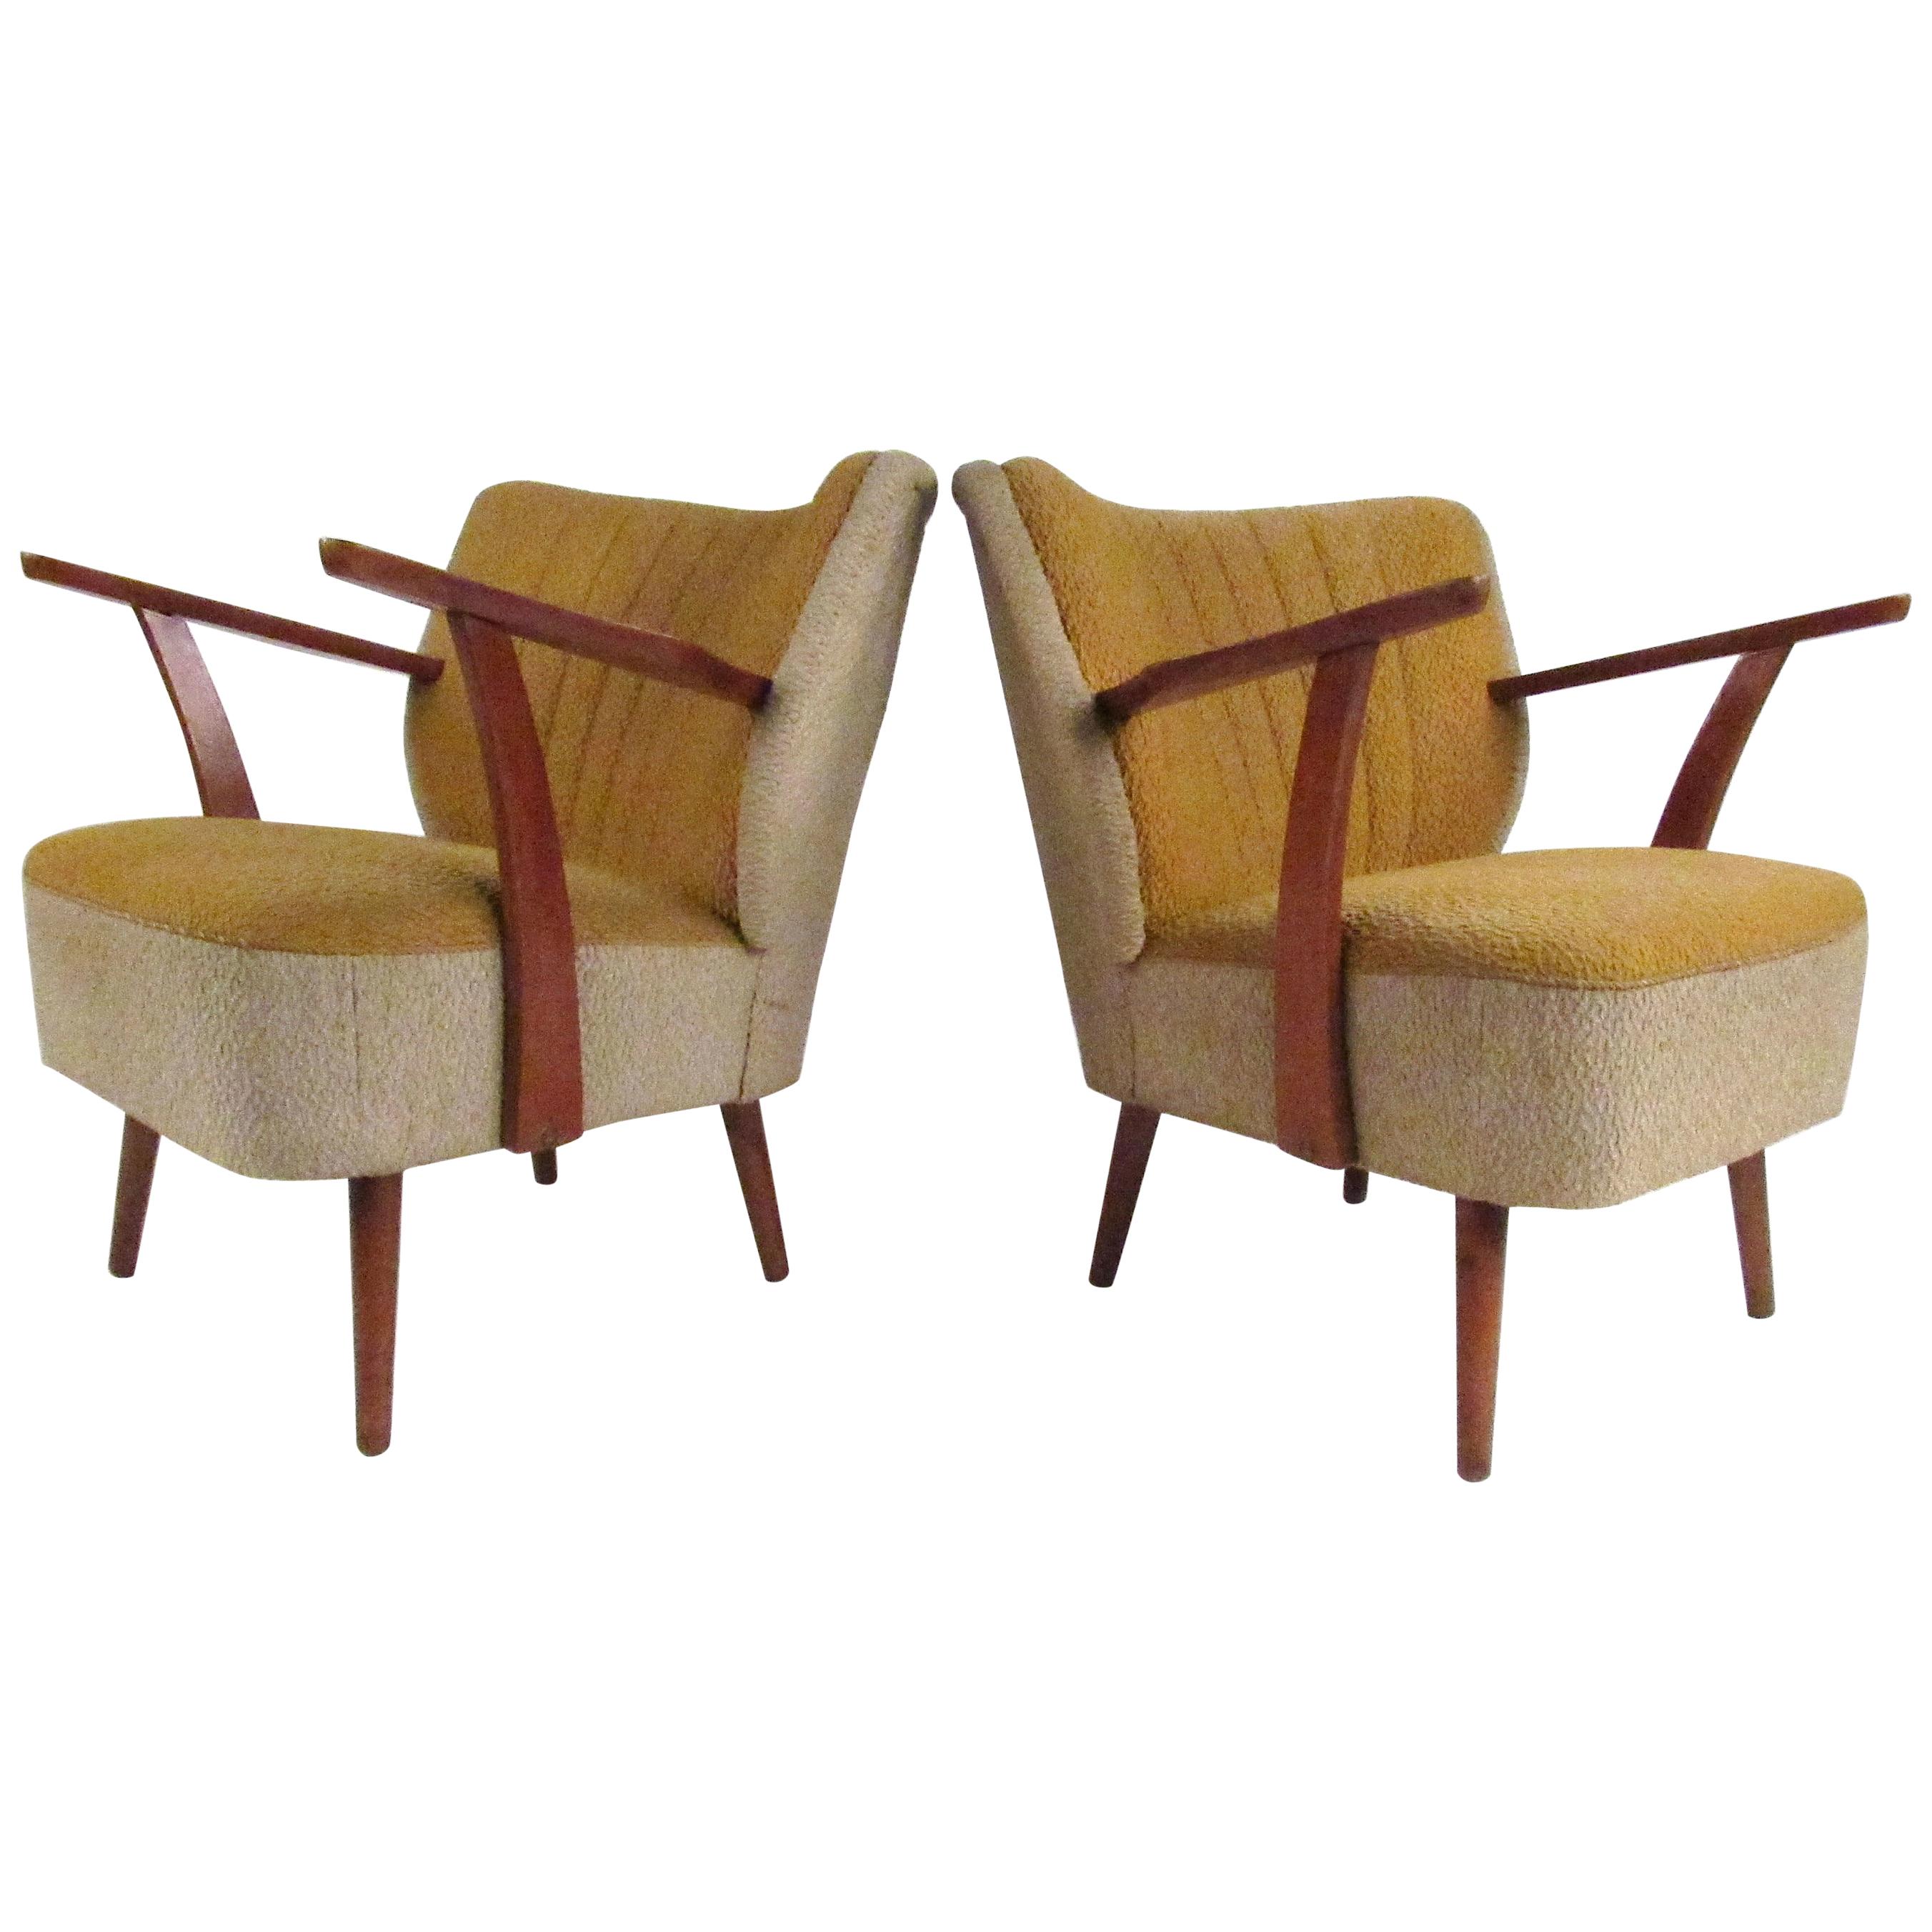 Pair of Sculptural Vintage Cocktail Chairs